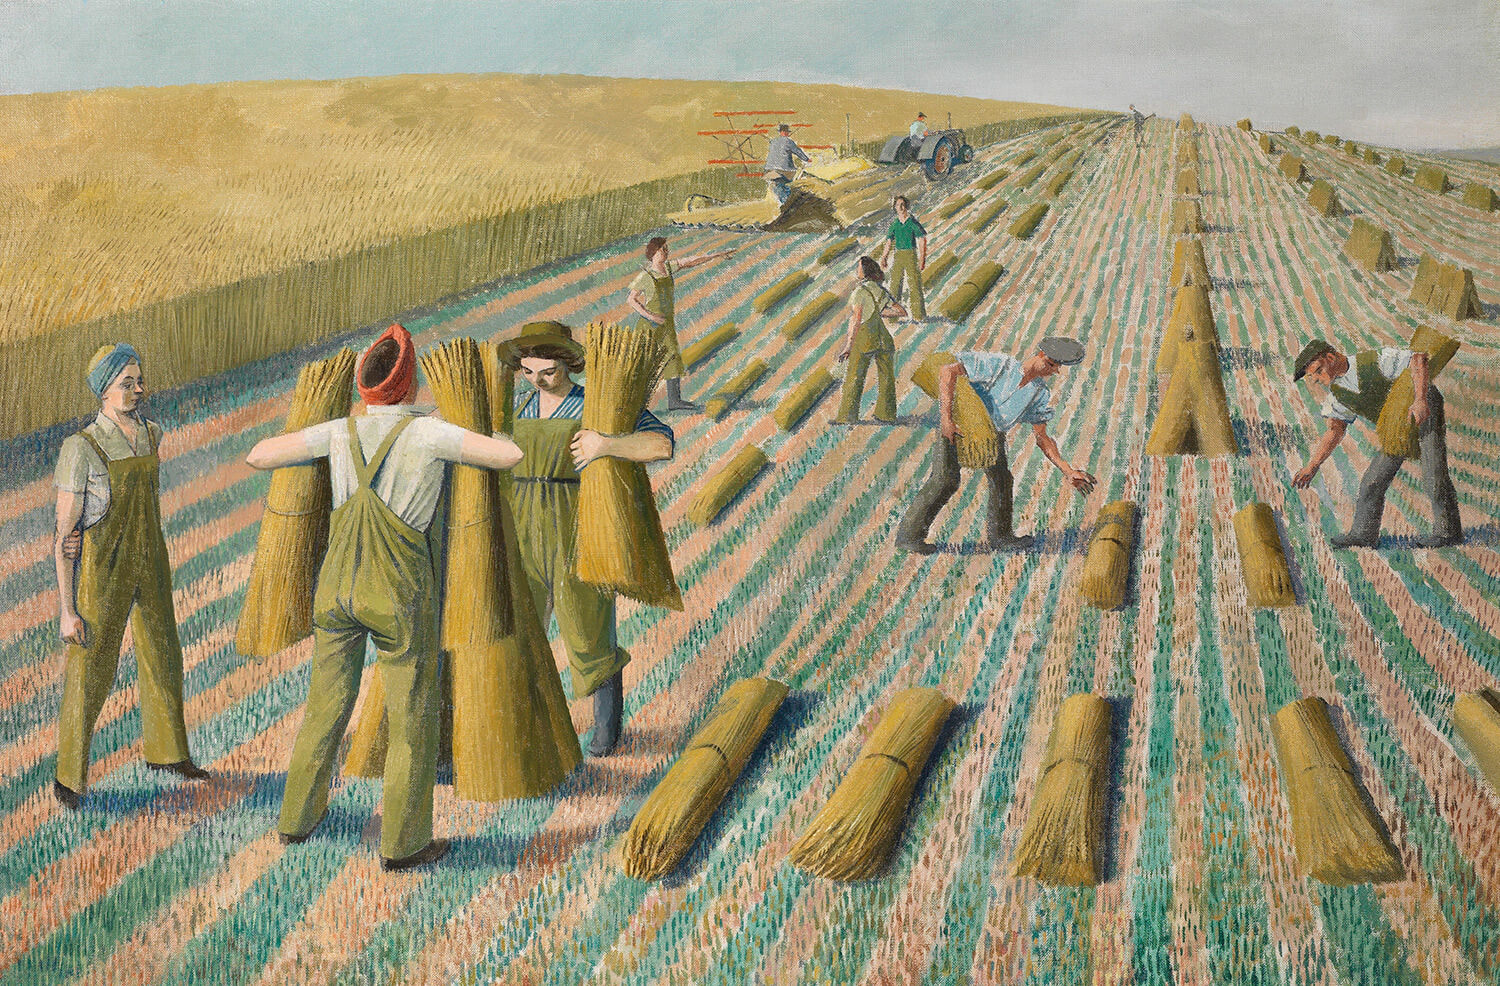 Evelyn Dunbar - Men Stooking and Girls Learning to Stook. 1940